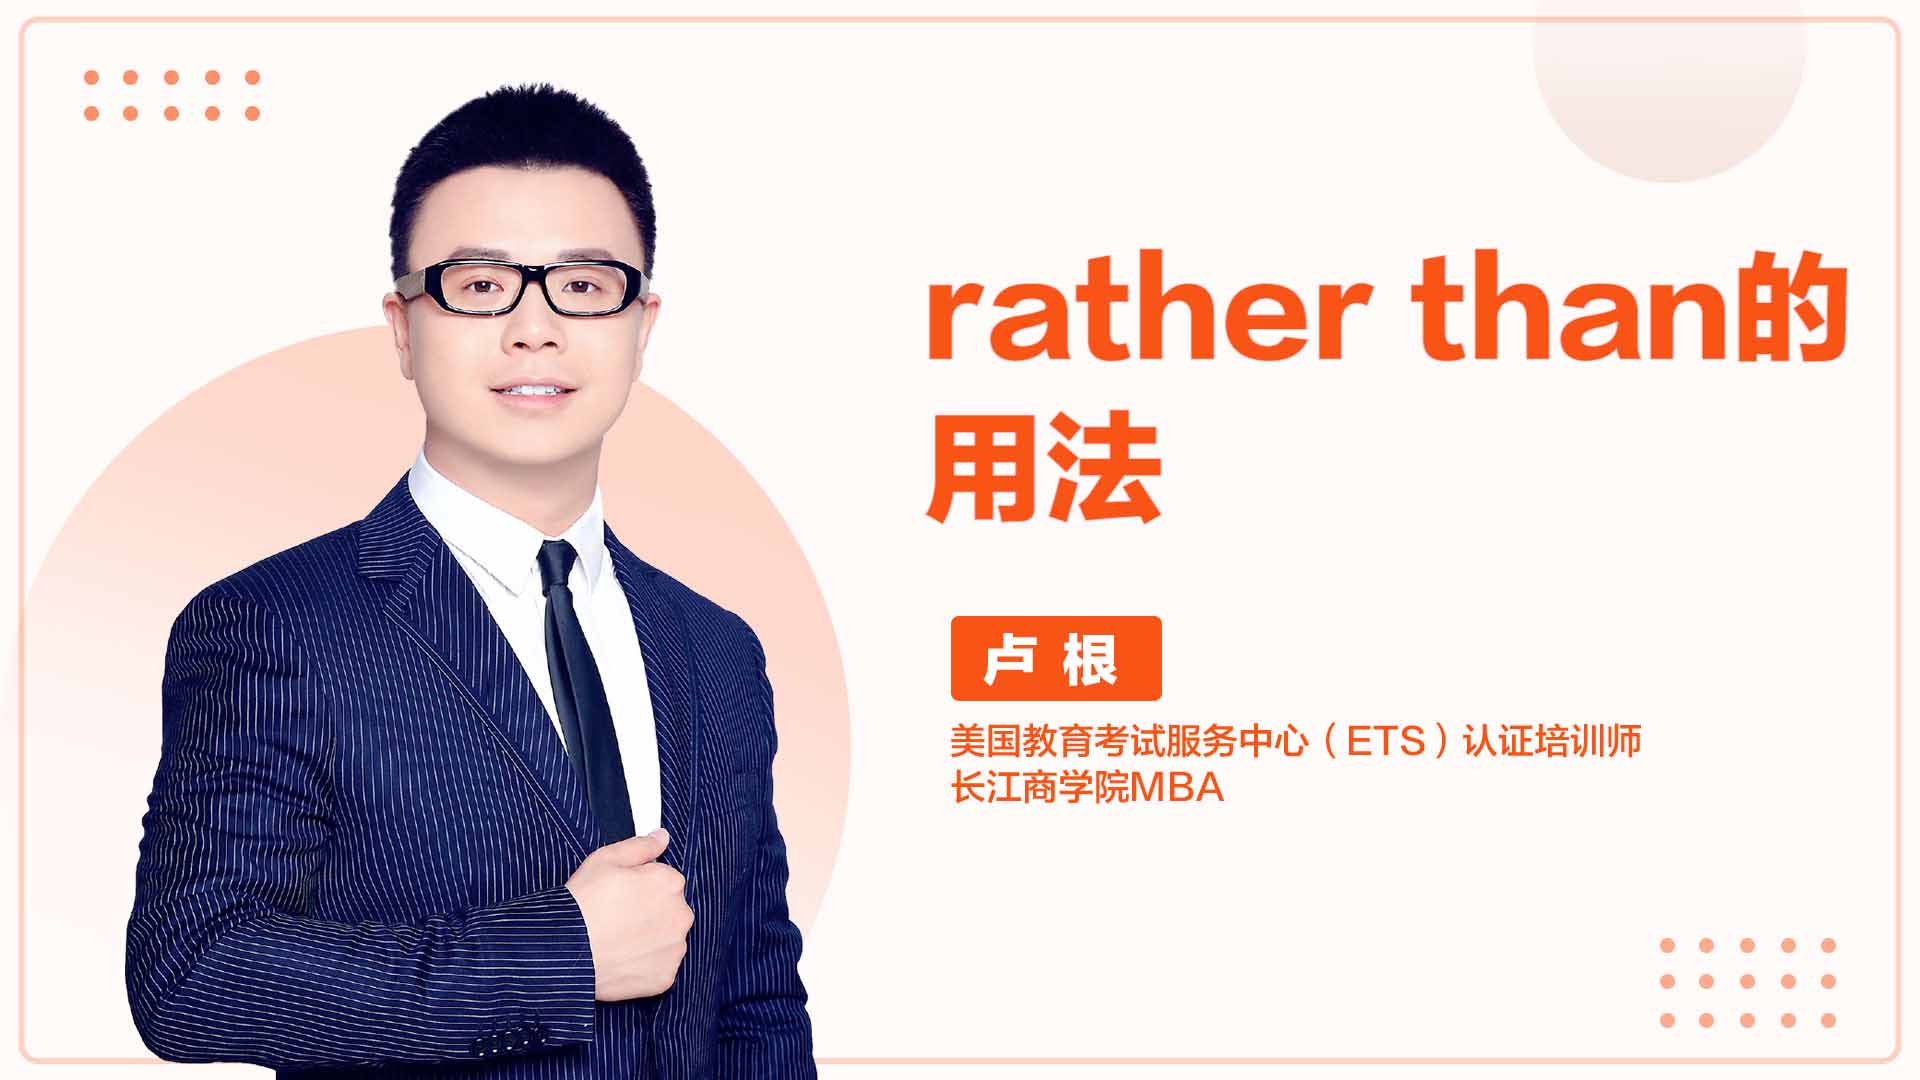 rather than的用法